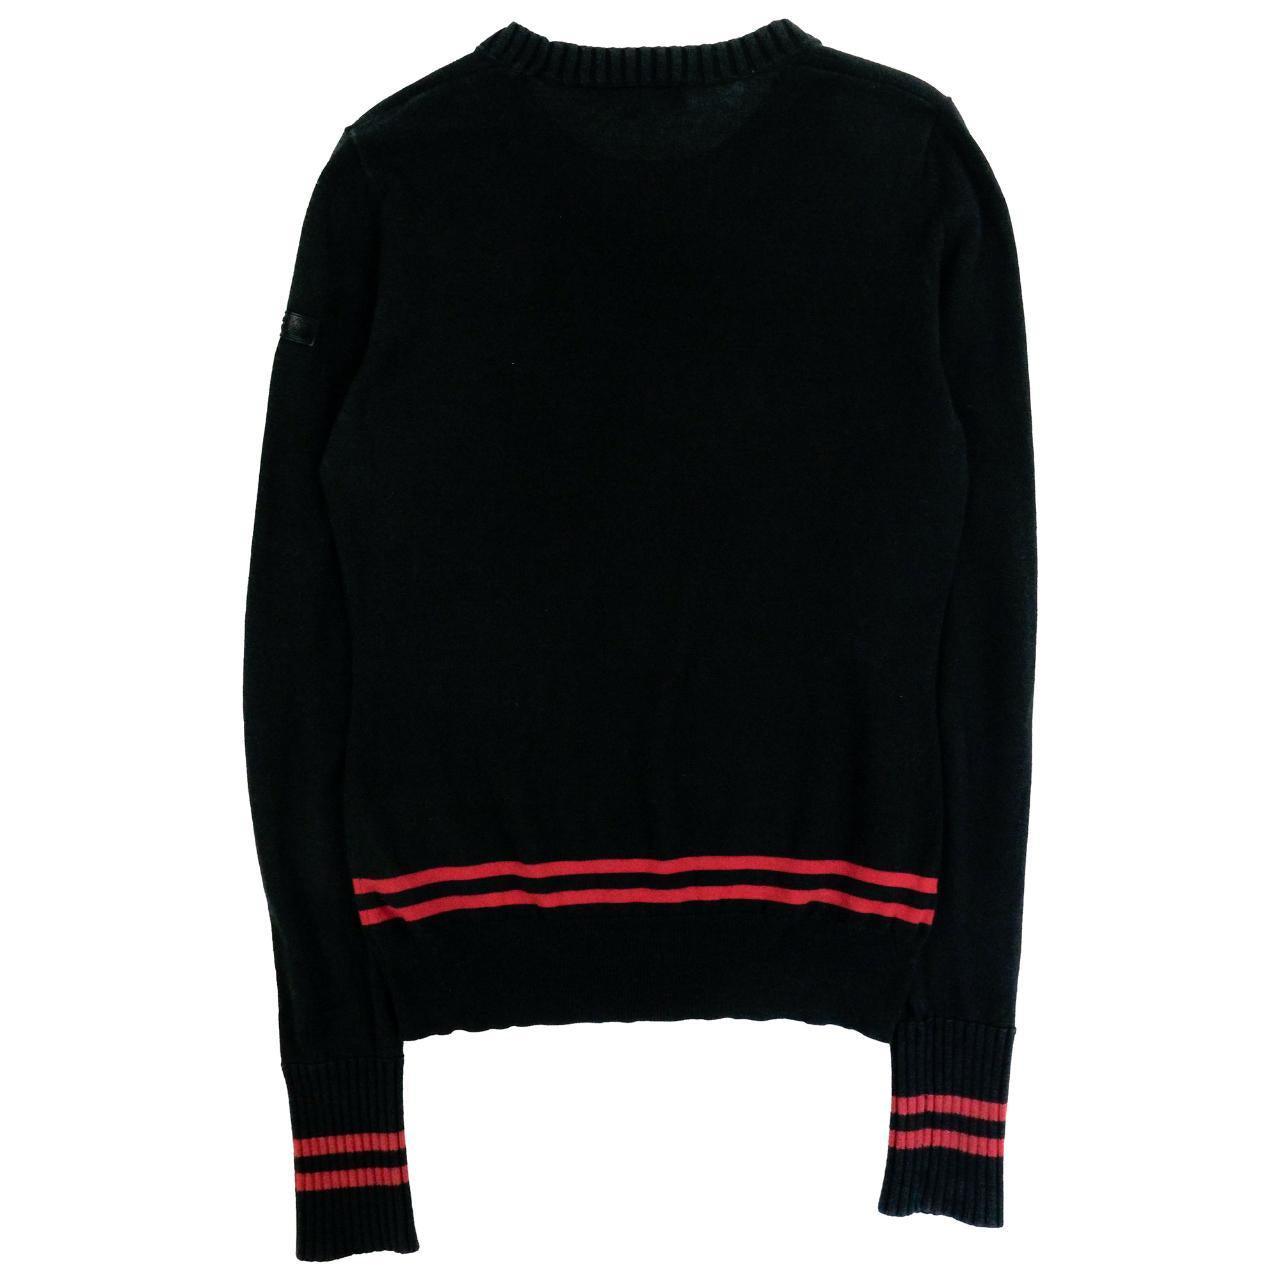 Vintage Burberry Sport Knitted Jumper Size S - Known Source